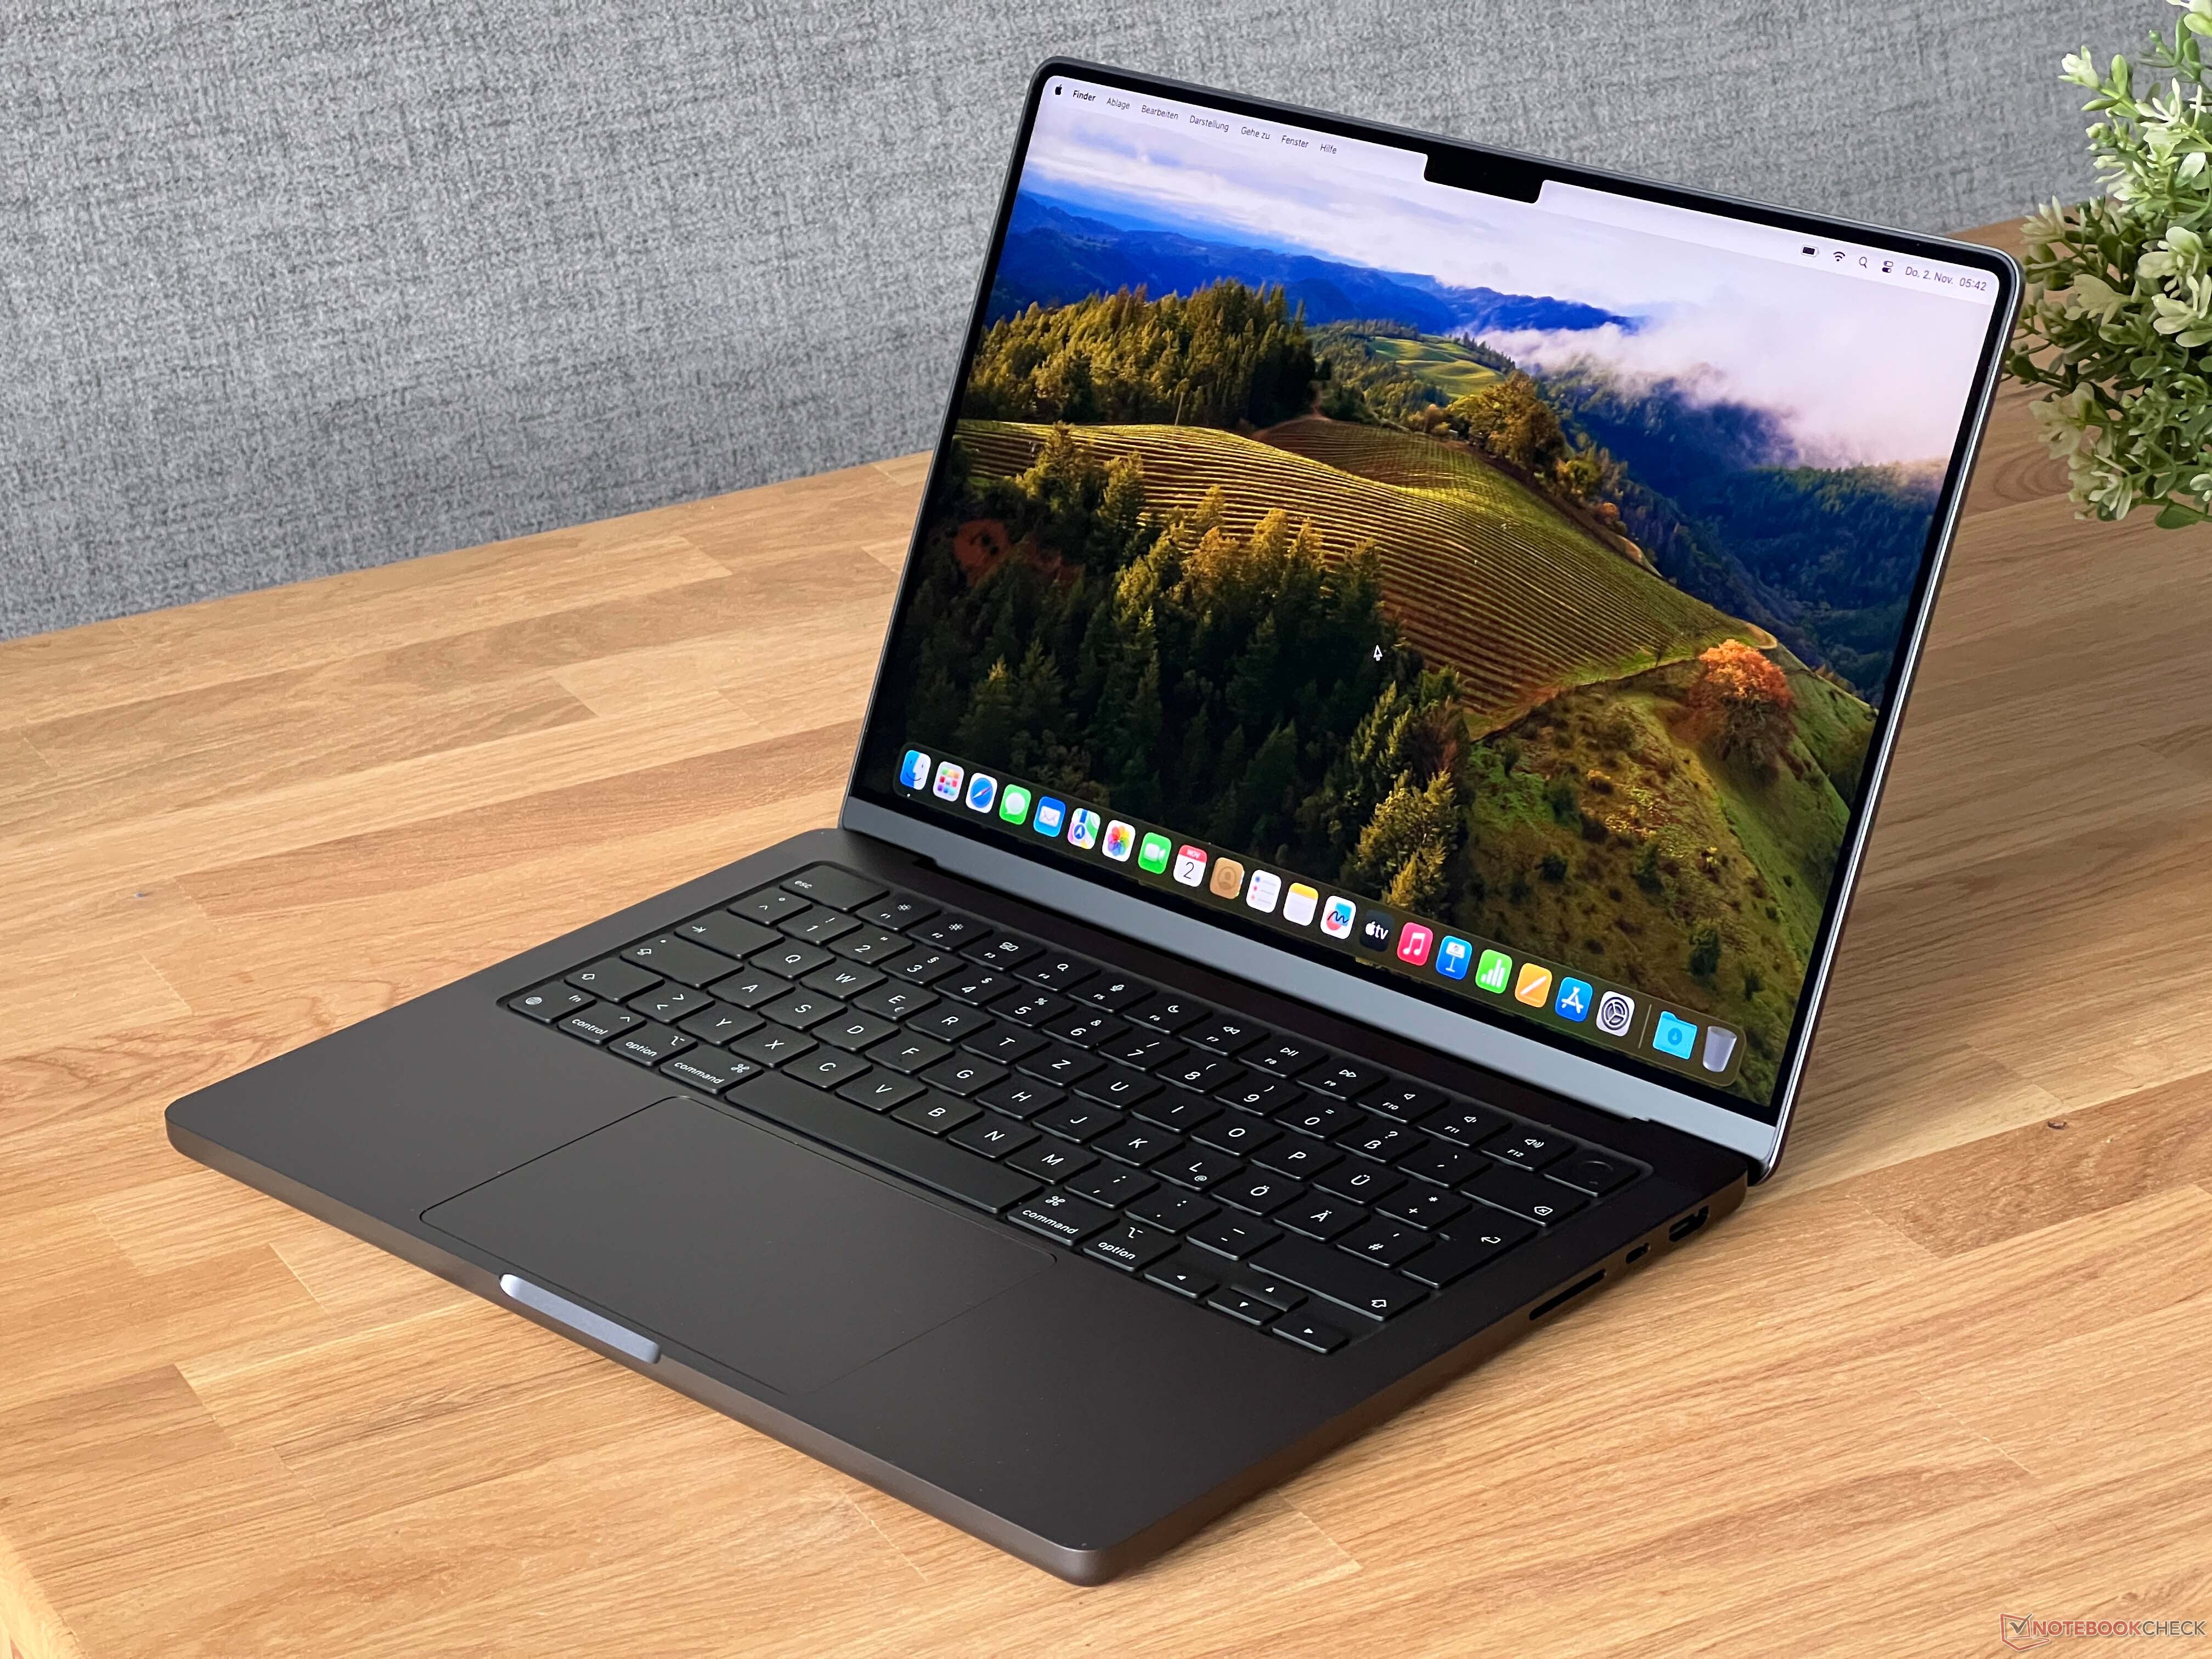 Base M3 MBP at $1599 has 8 GB RAM and 2 USB C ports : r/macbookpro